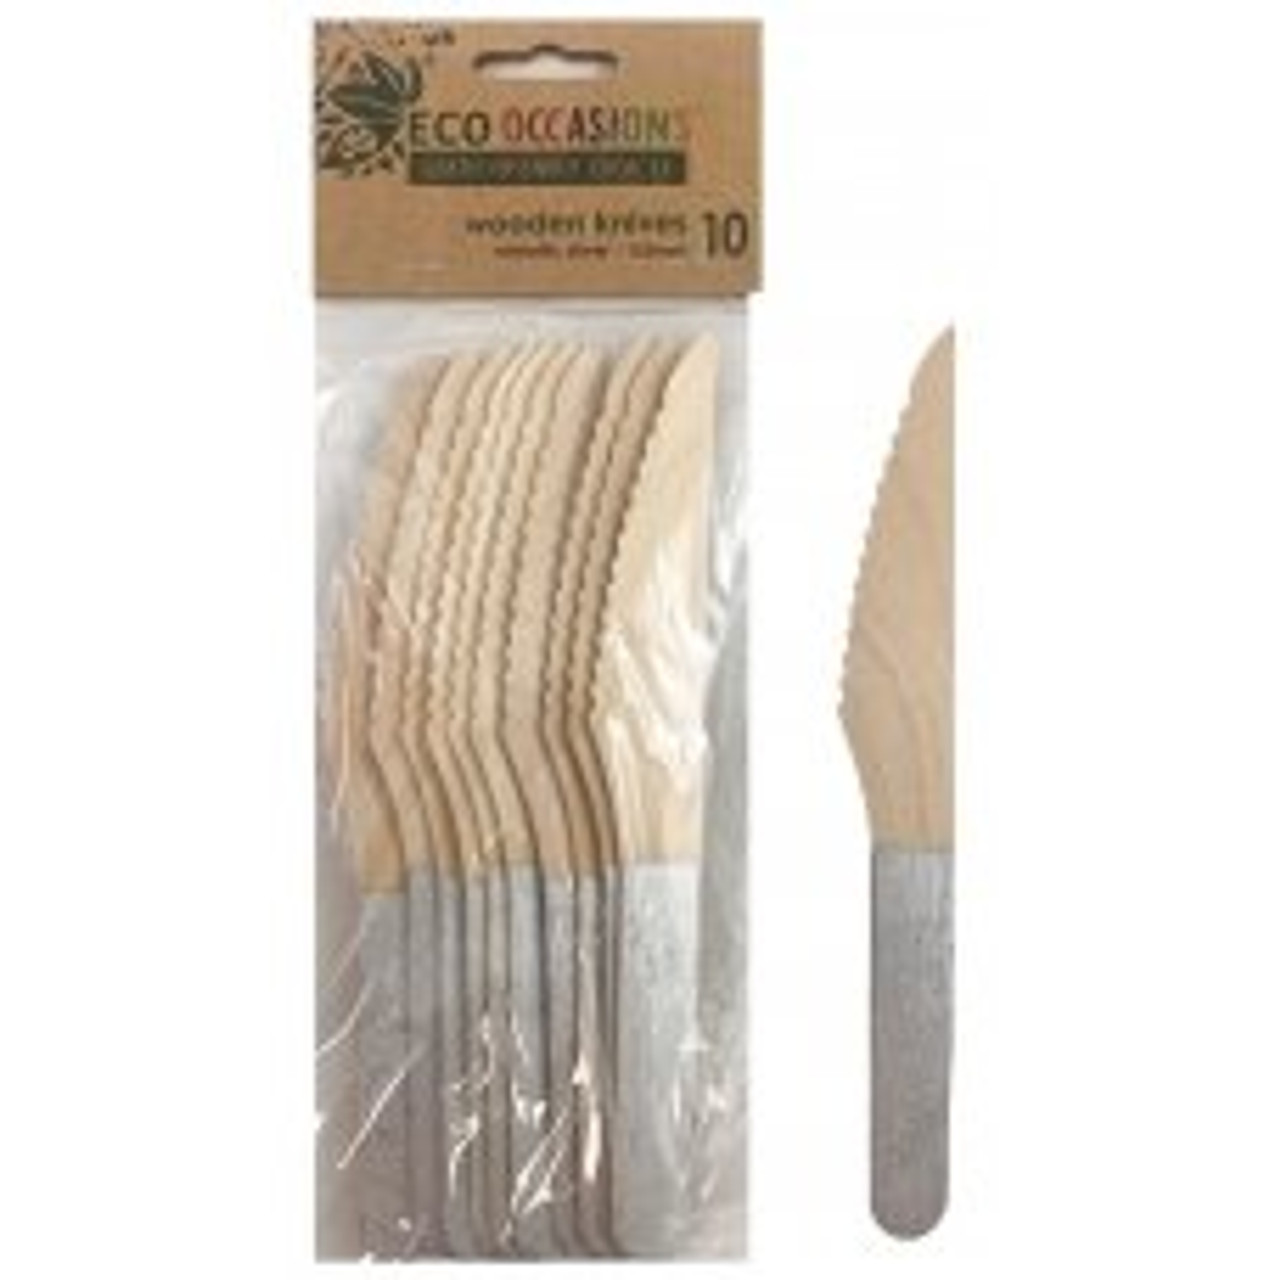 ECO WOODEN CUTLERY SILVER KNIVES P10